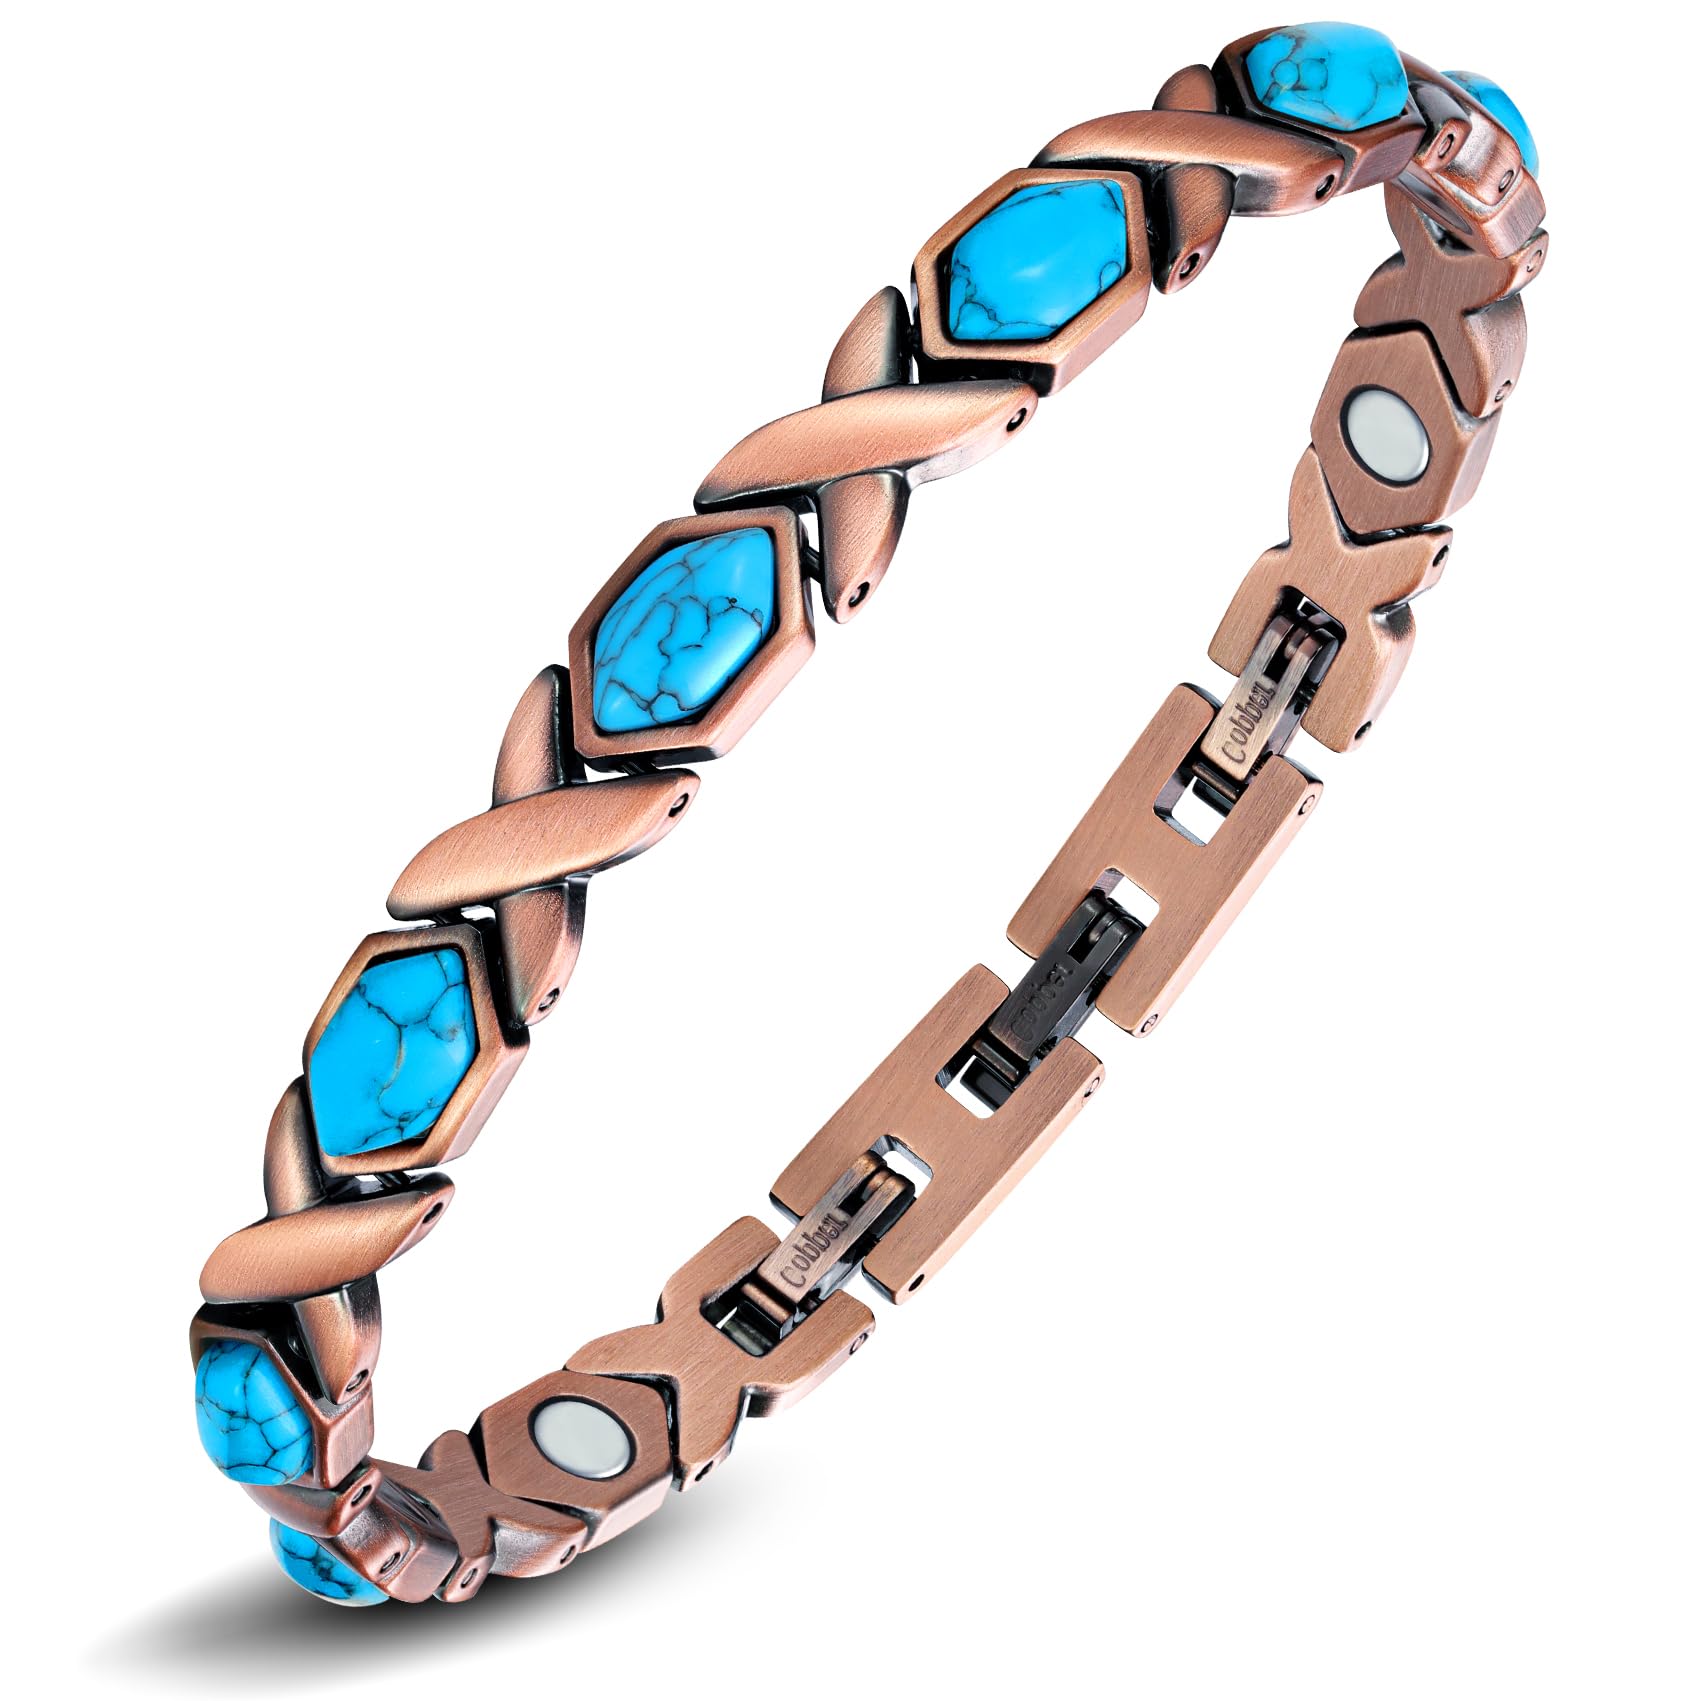 Copper Magnetic Health Cuff Bracelets For Women For Women Unique Charm  Jewelry Gift With Cuff Opening New Arrival Q0719 From Sihuai05, $5.92 |  DHgate.Com